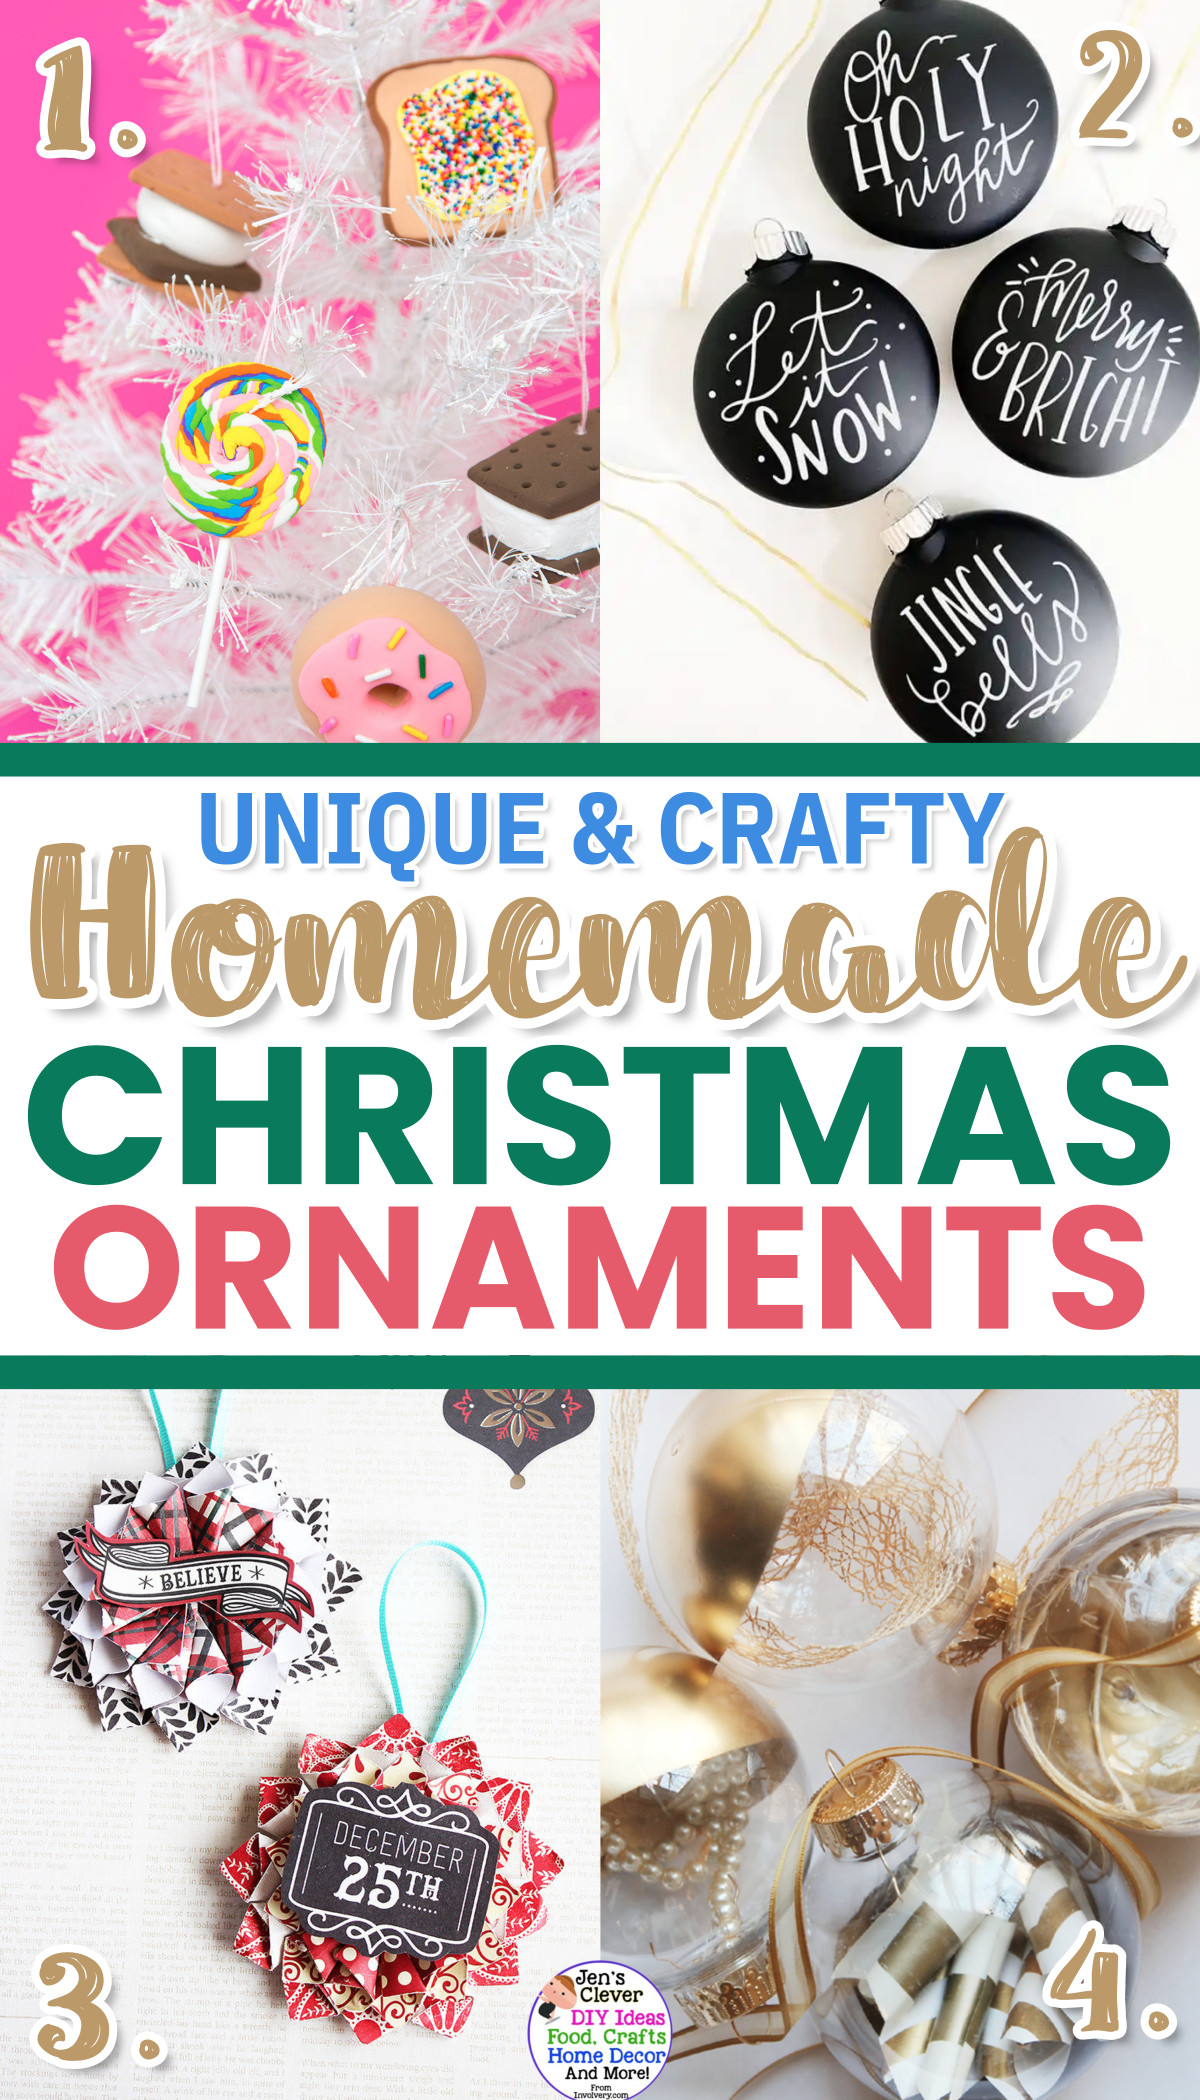 unique and crafty homemade Christmas ornaments to make